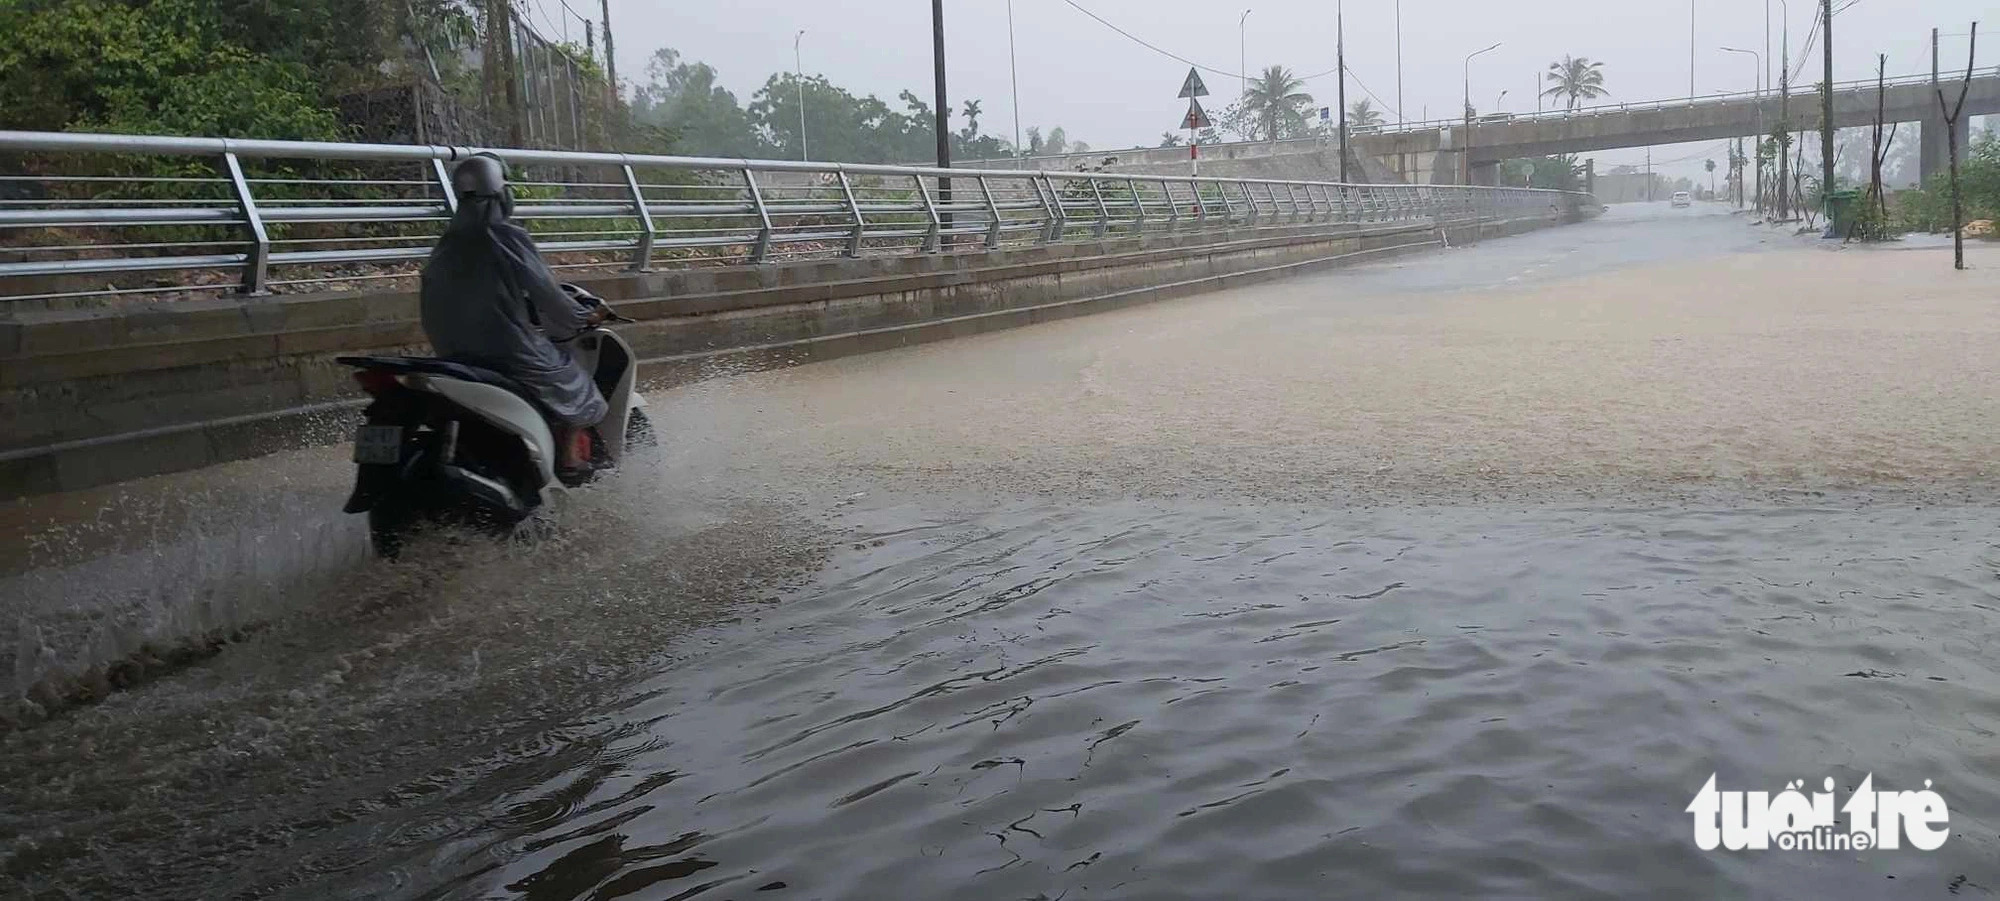 An inter-provincial road running through Hoa Vang District, Da Nang City, central Vietnam is submerged in nearly 40 centimeters of water. Photo: Doan Cuong / Tuoi Tre